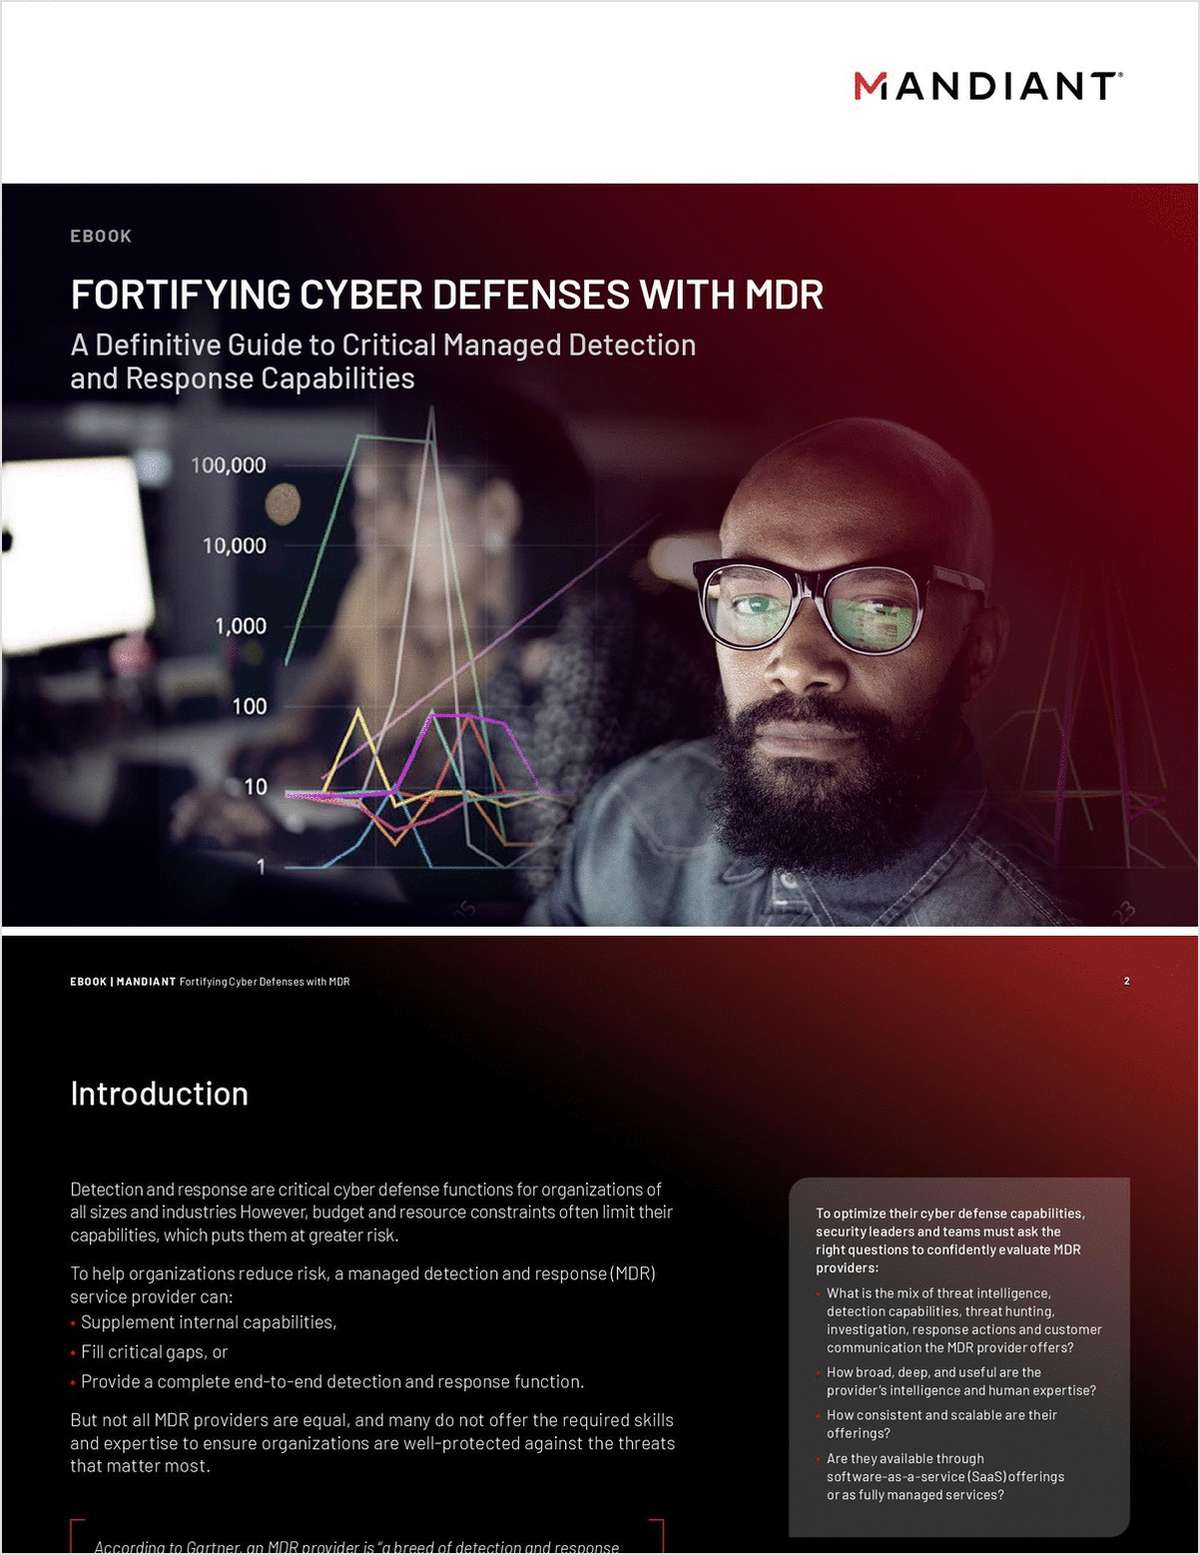 Fortifying Cyber Defenses with MDR